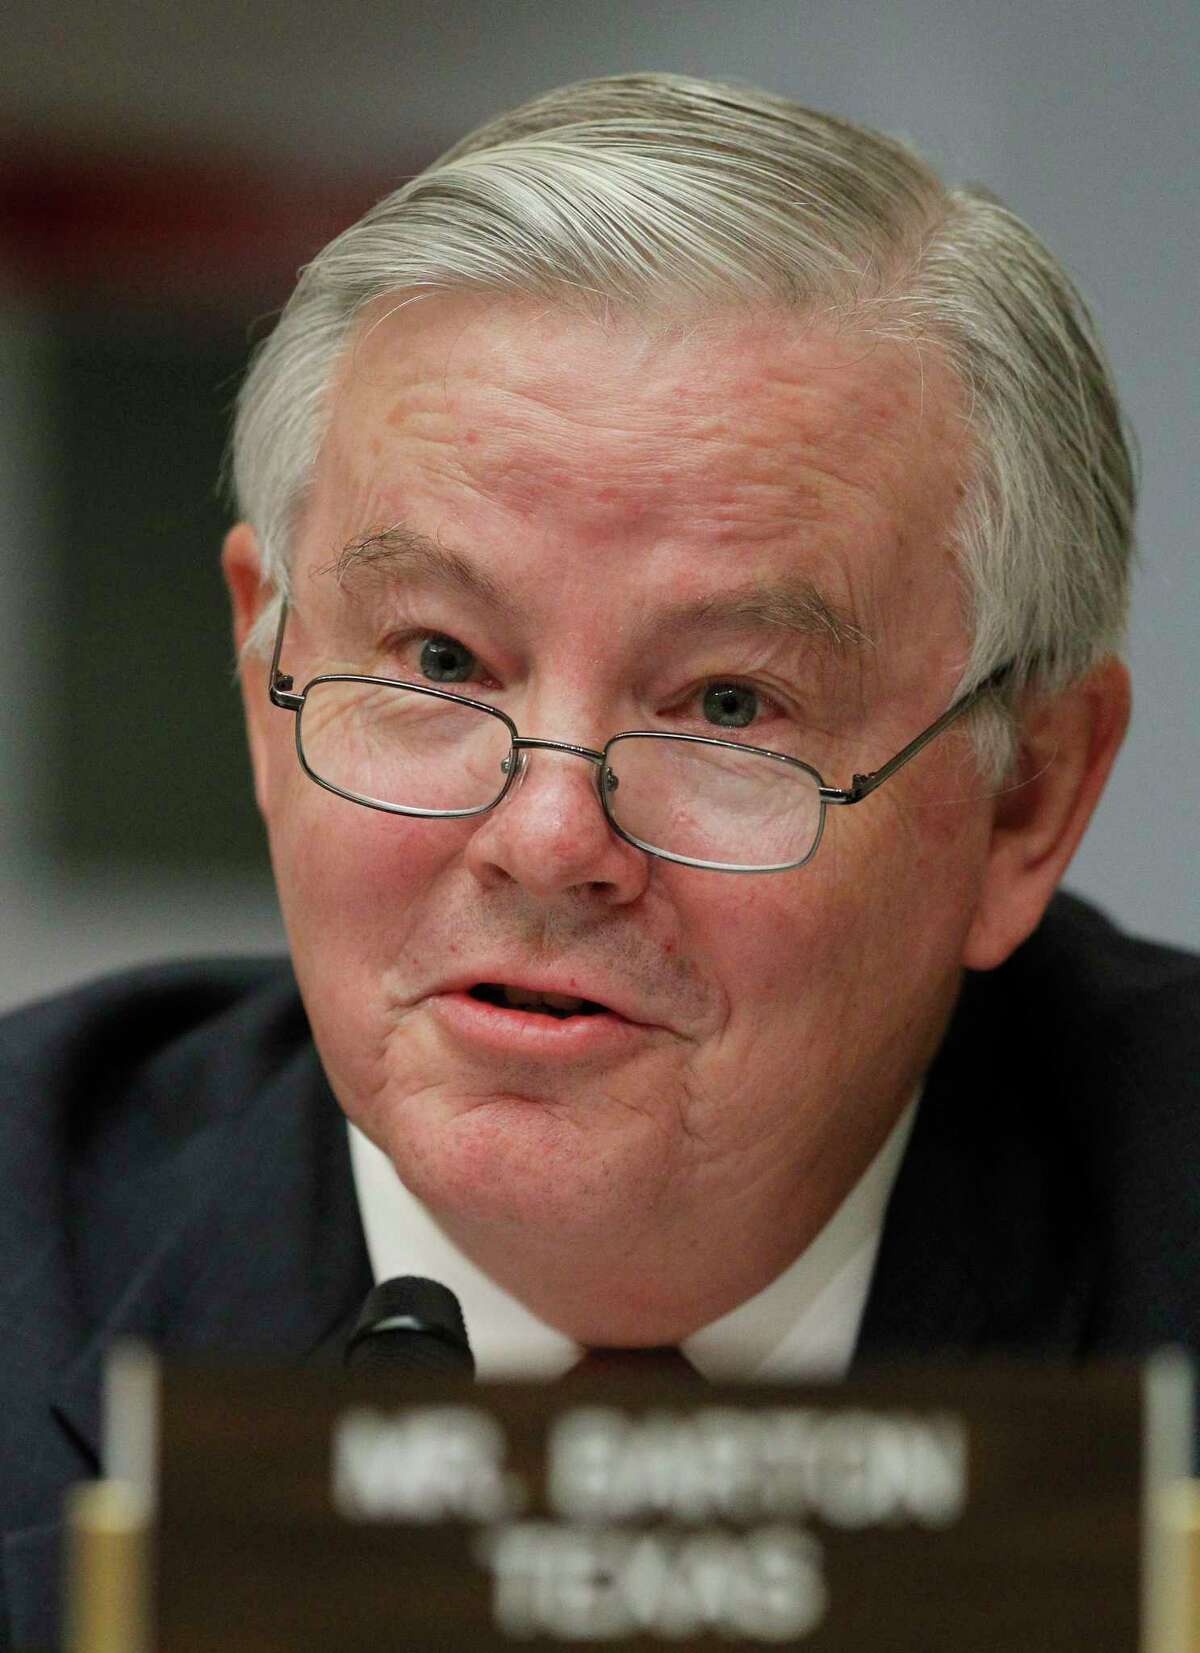 Rep. Joe Barton, R-Texas, makes his opening statement during a House Subcommittee on Oversight and Investigations and the Subcommittee on Energy and Environment joint hearing on the role of the Interior Department in the Deepwater Horizon disaster on Capitol Hill in Washington Tuesday, July 20, 2010. The hearing examines the Interior Department's actions before and since the Deepwater Horizon explosion on April 20, 2010. (AP Photo/Manuel Balce Ceneta)